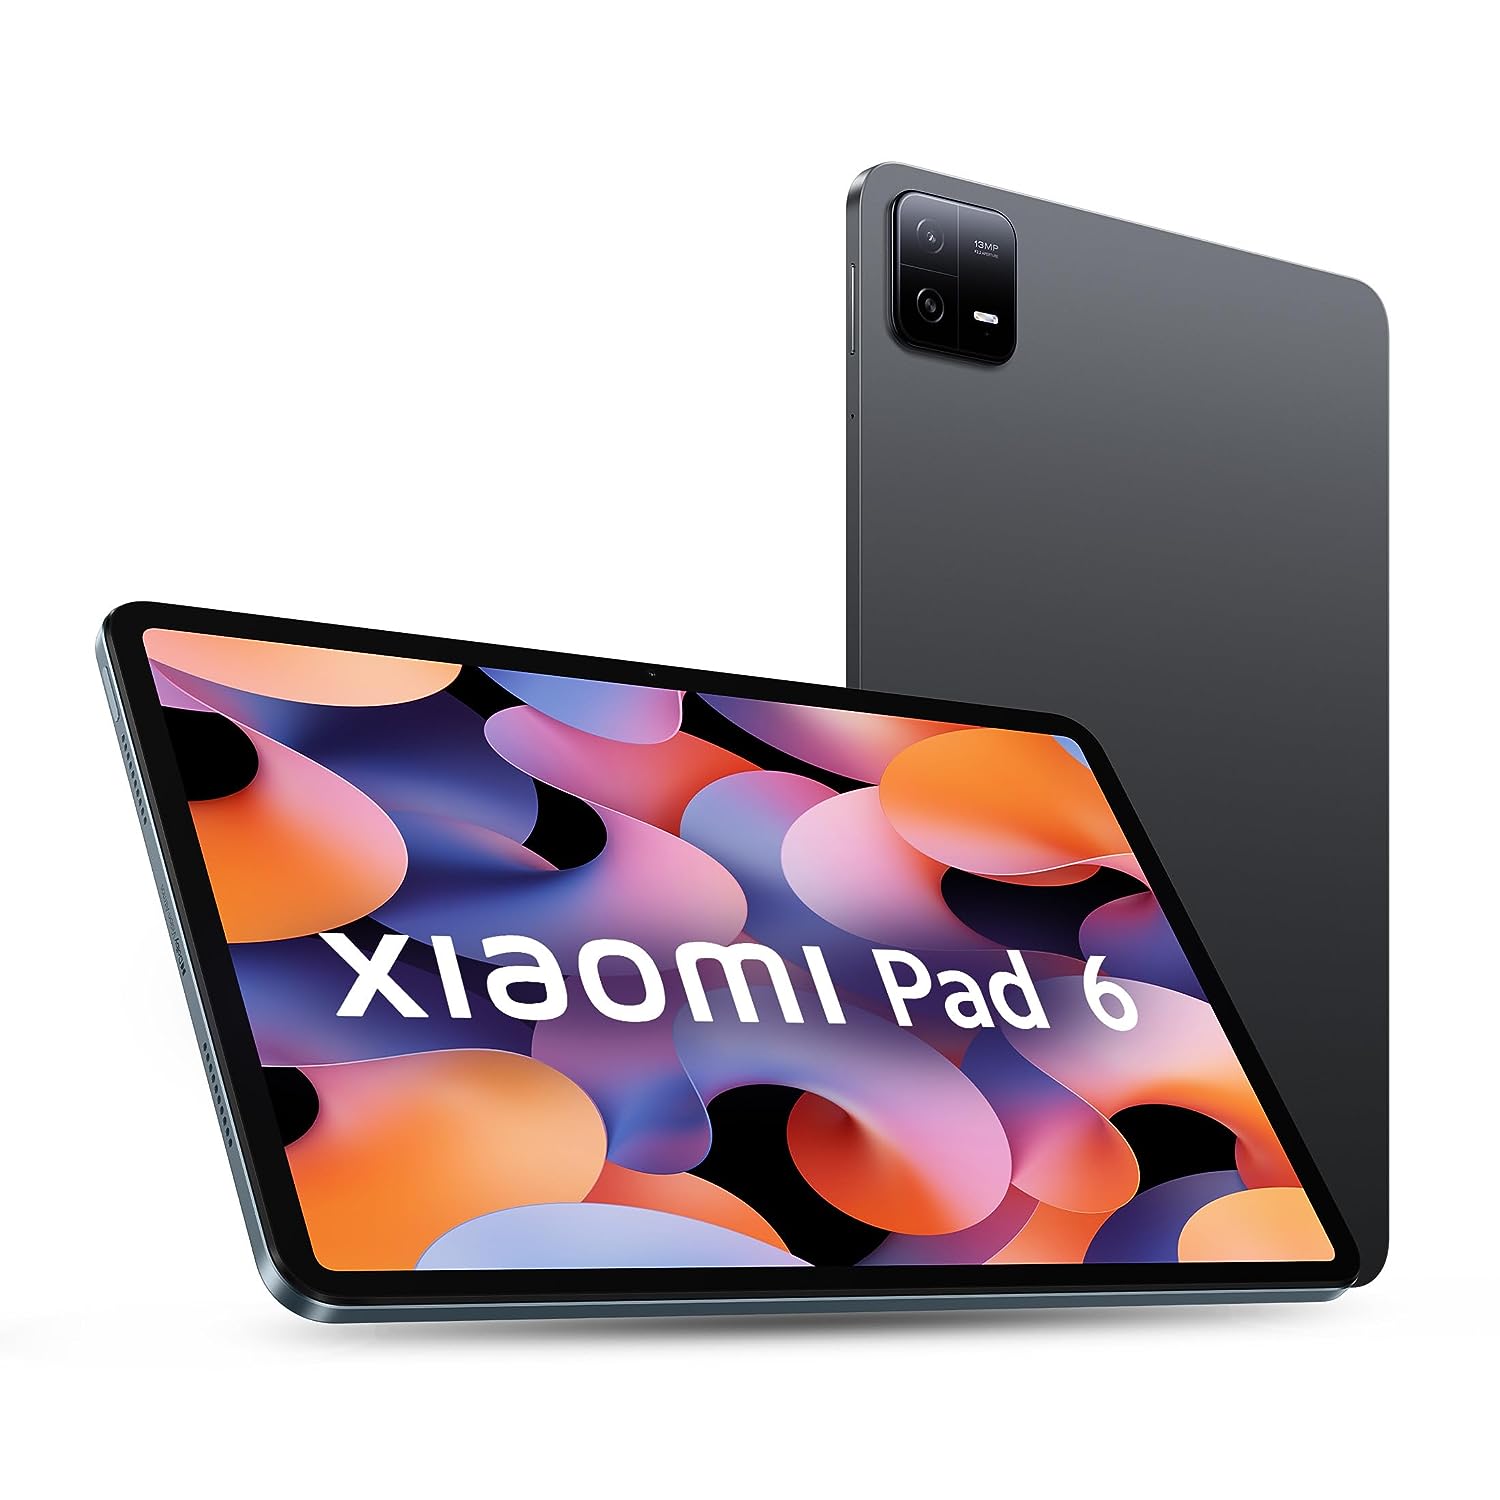 Xiaomi Pad 6 India-specific variant appears on Geekbench. What to expect  ahead of official launch